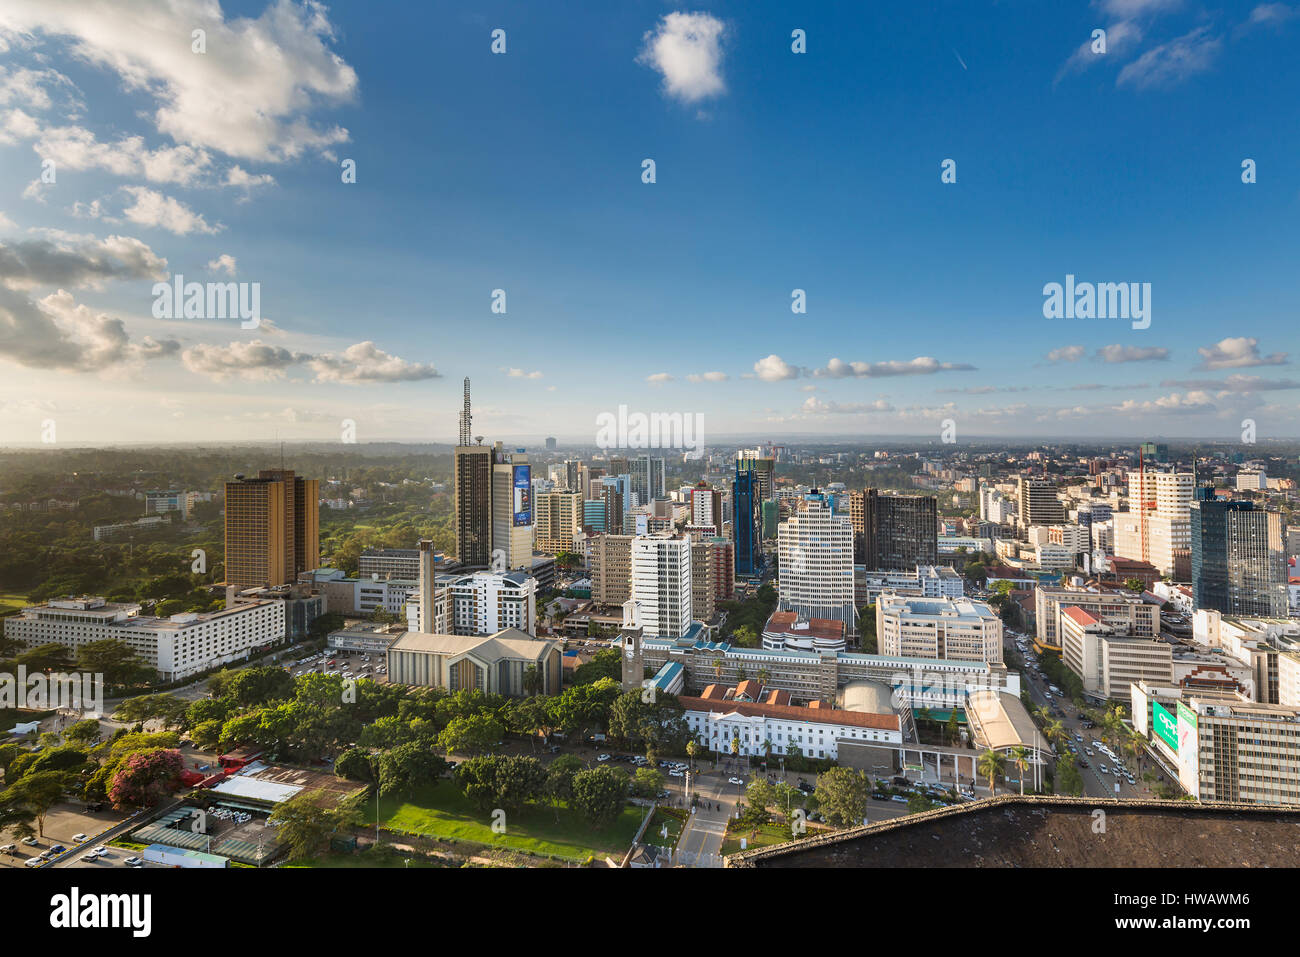 Nairobi, Kenya - December 23: Teleposta Towers and other highrises and streets in the business district of Nairobi, Kenya on December 23, 2015 Stock Photo